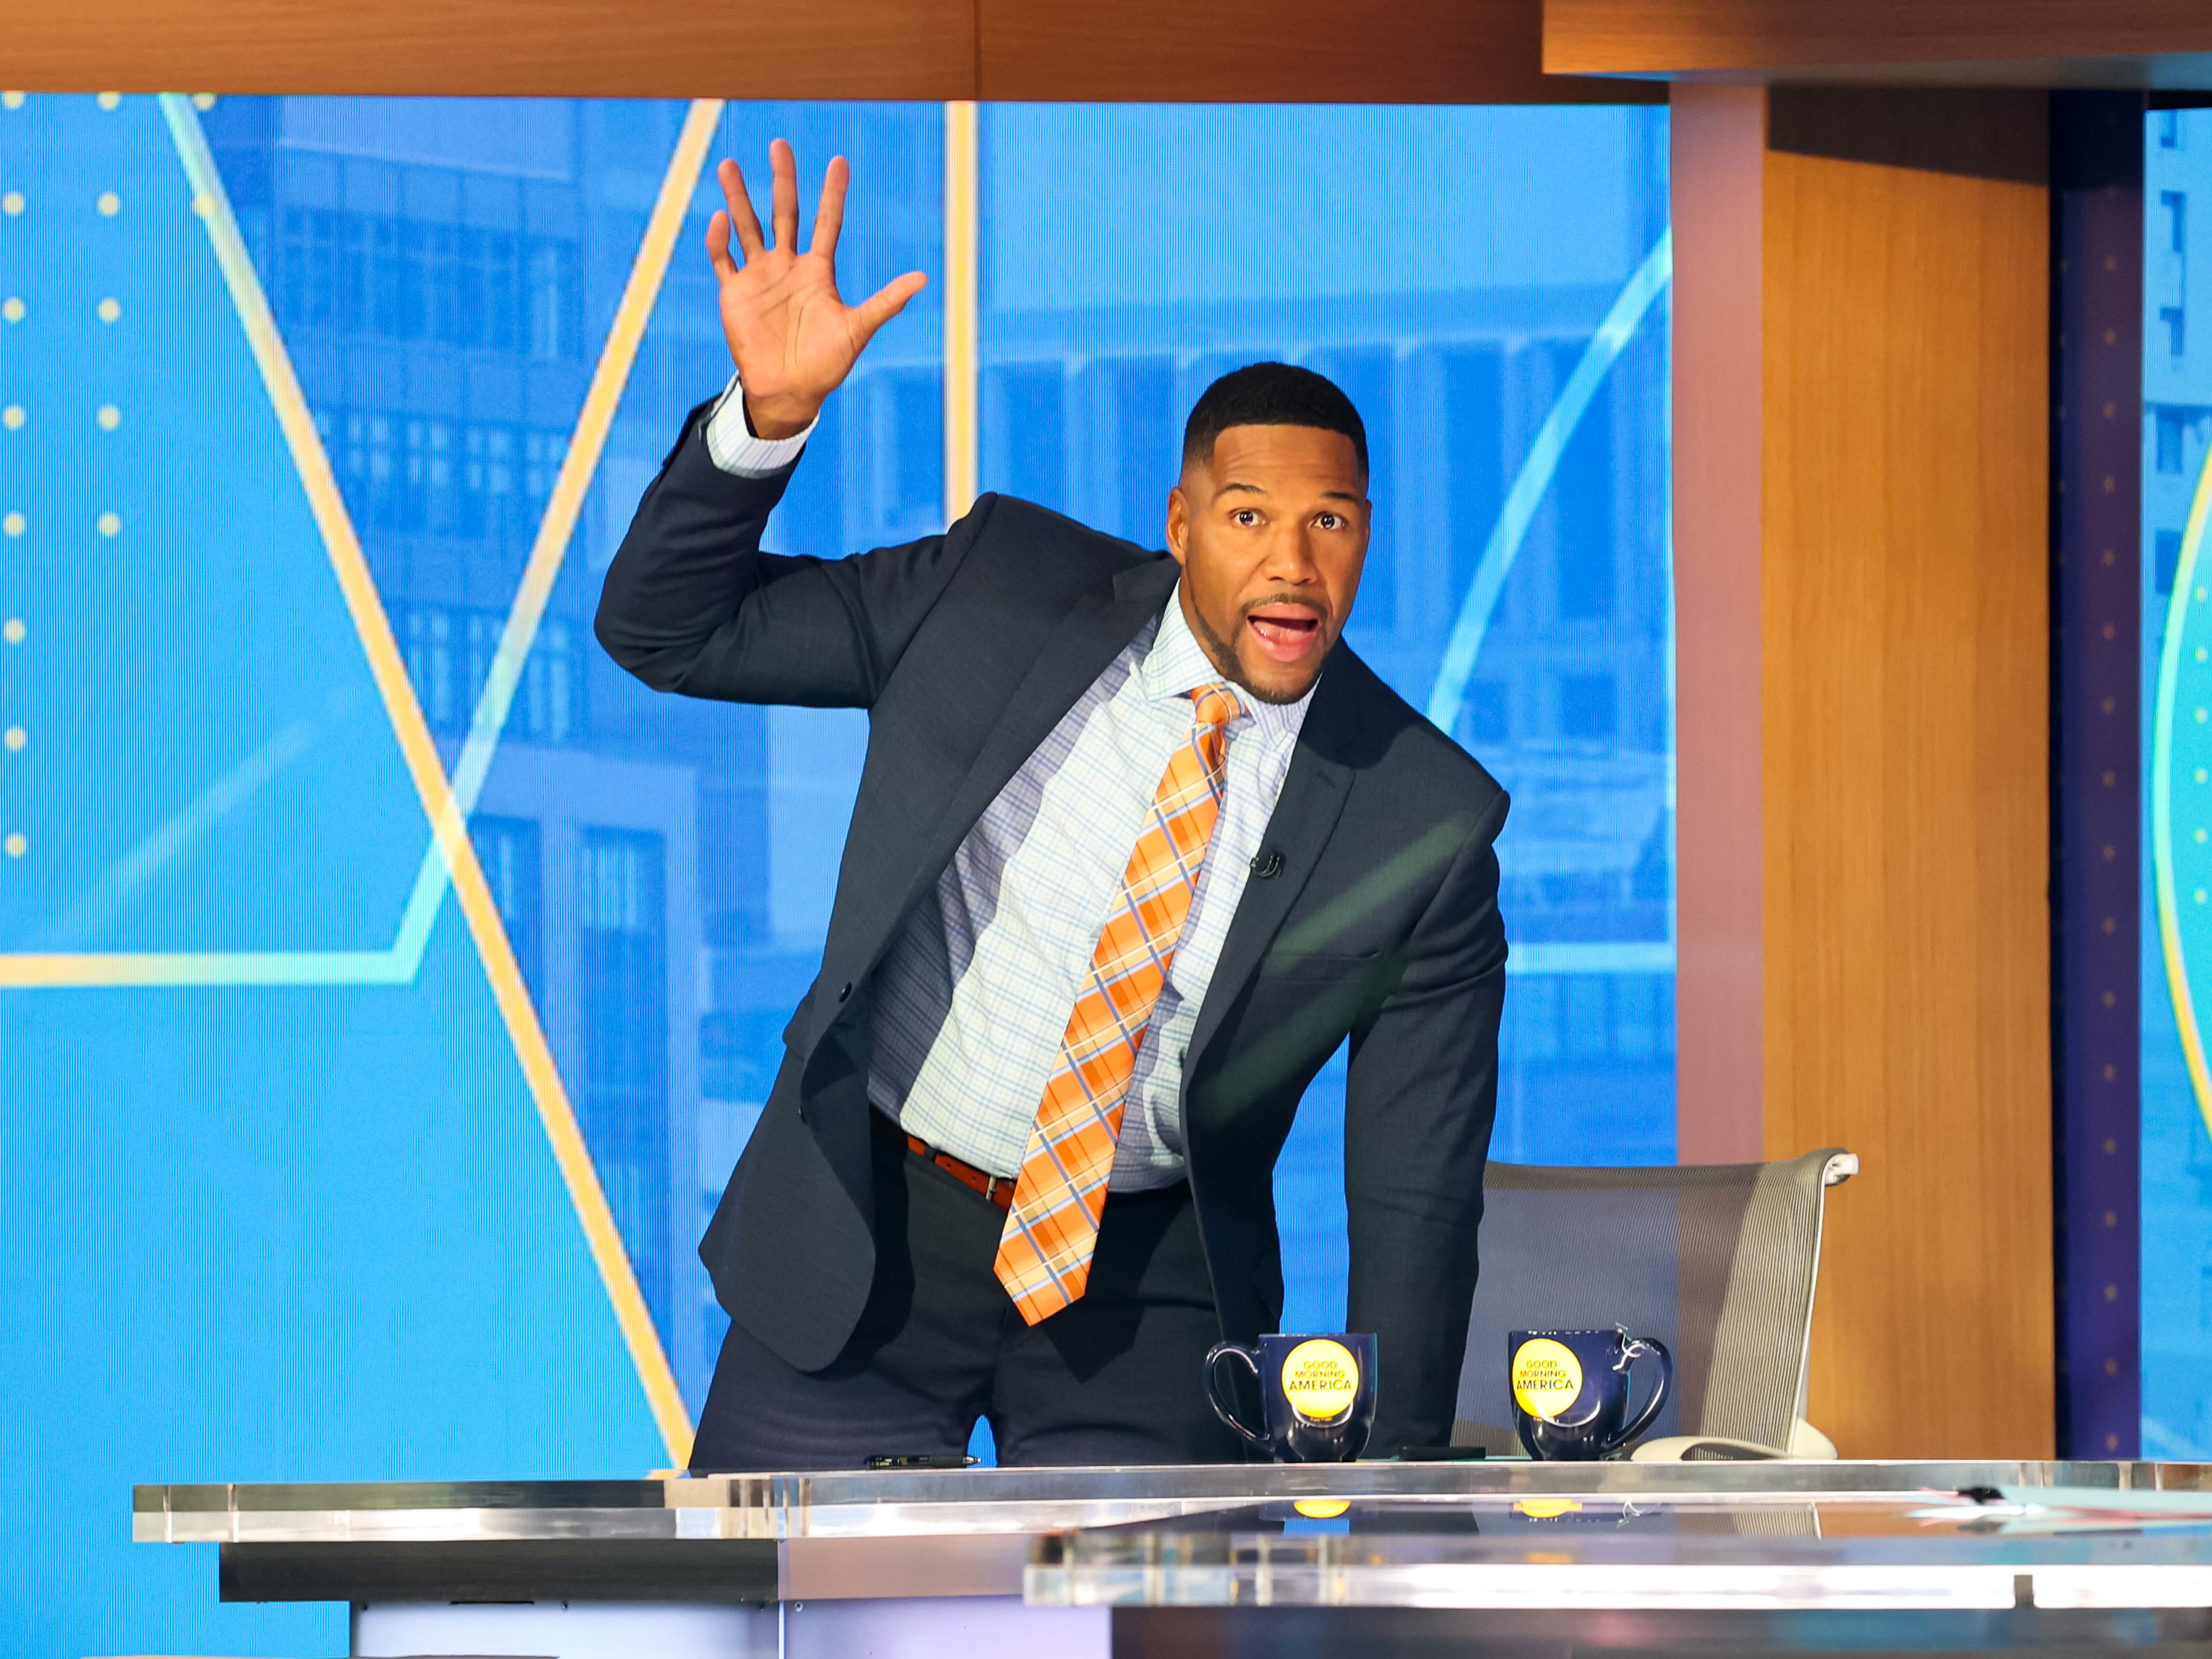 Michael Strahan's Whereabouts Finally Revealed Amid Lengthy 'GMA' Absence